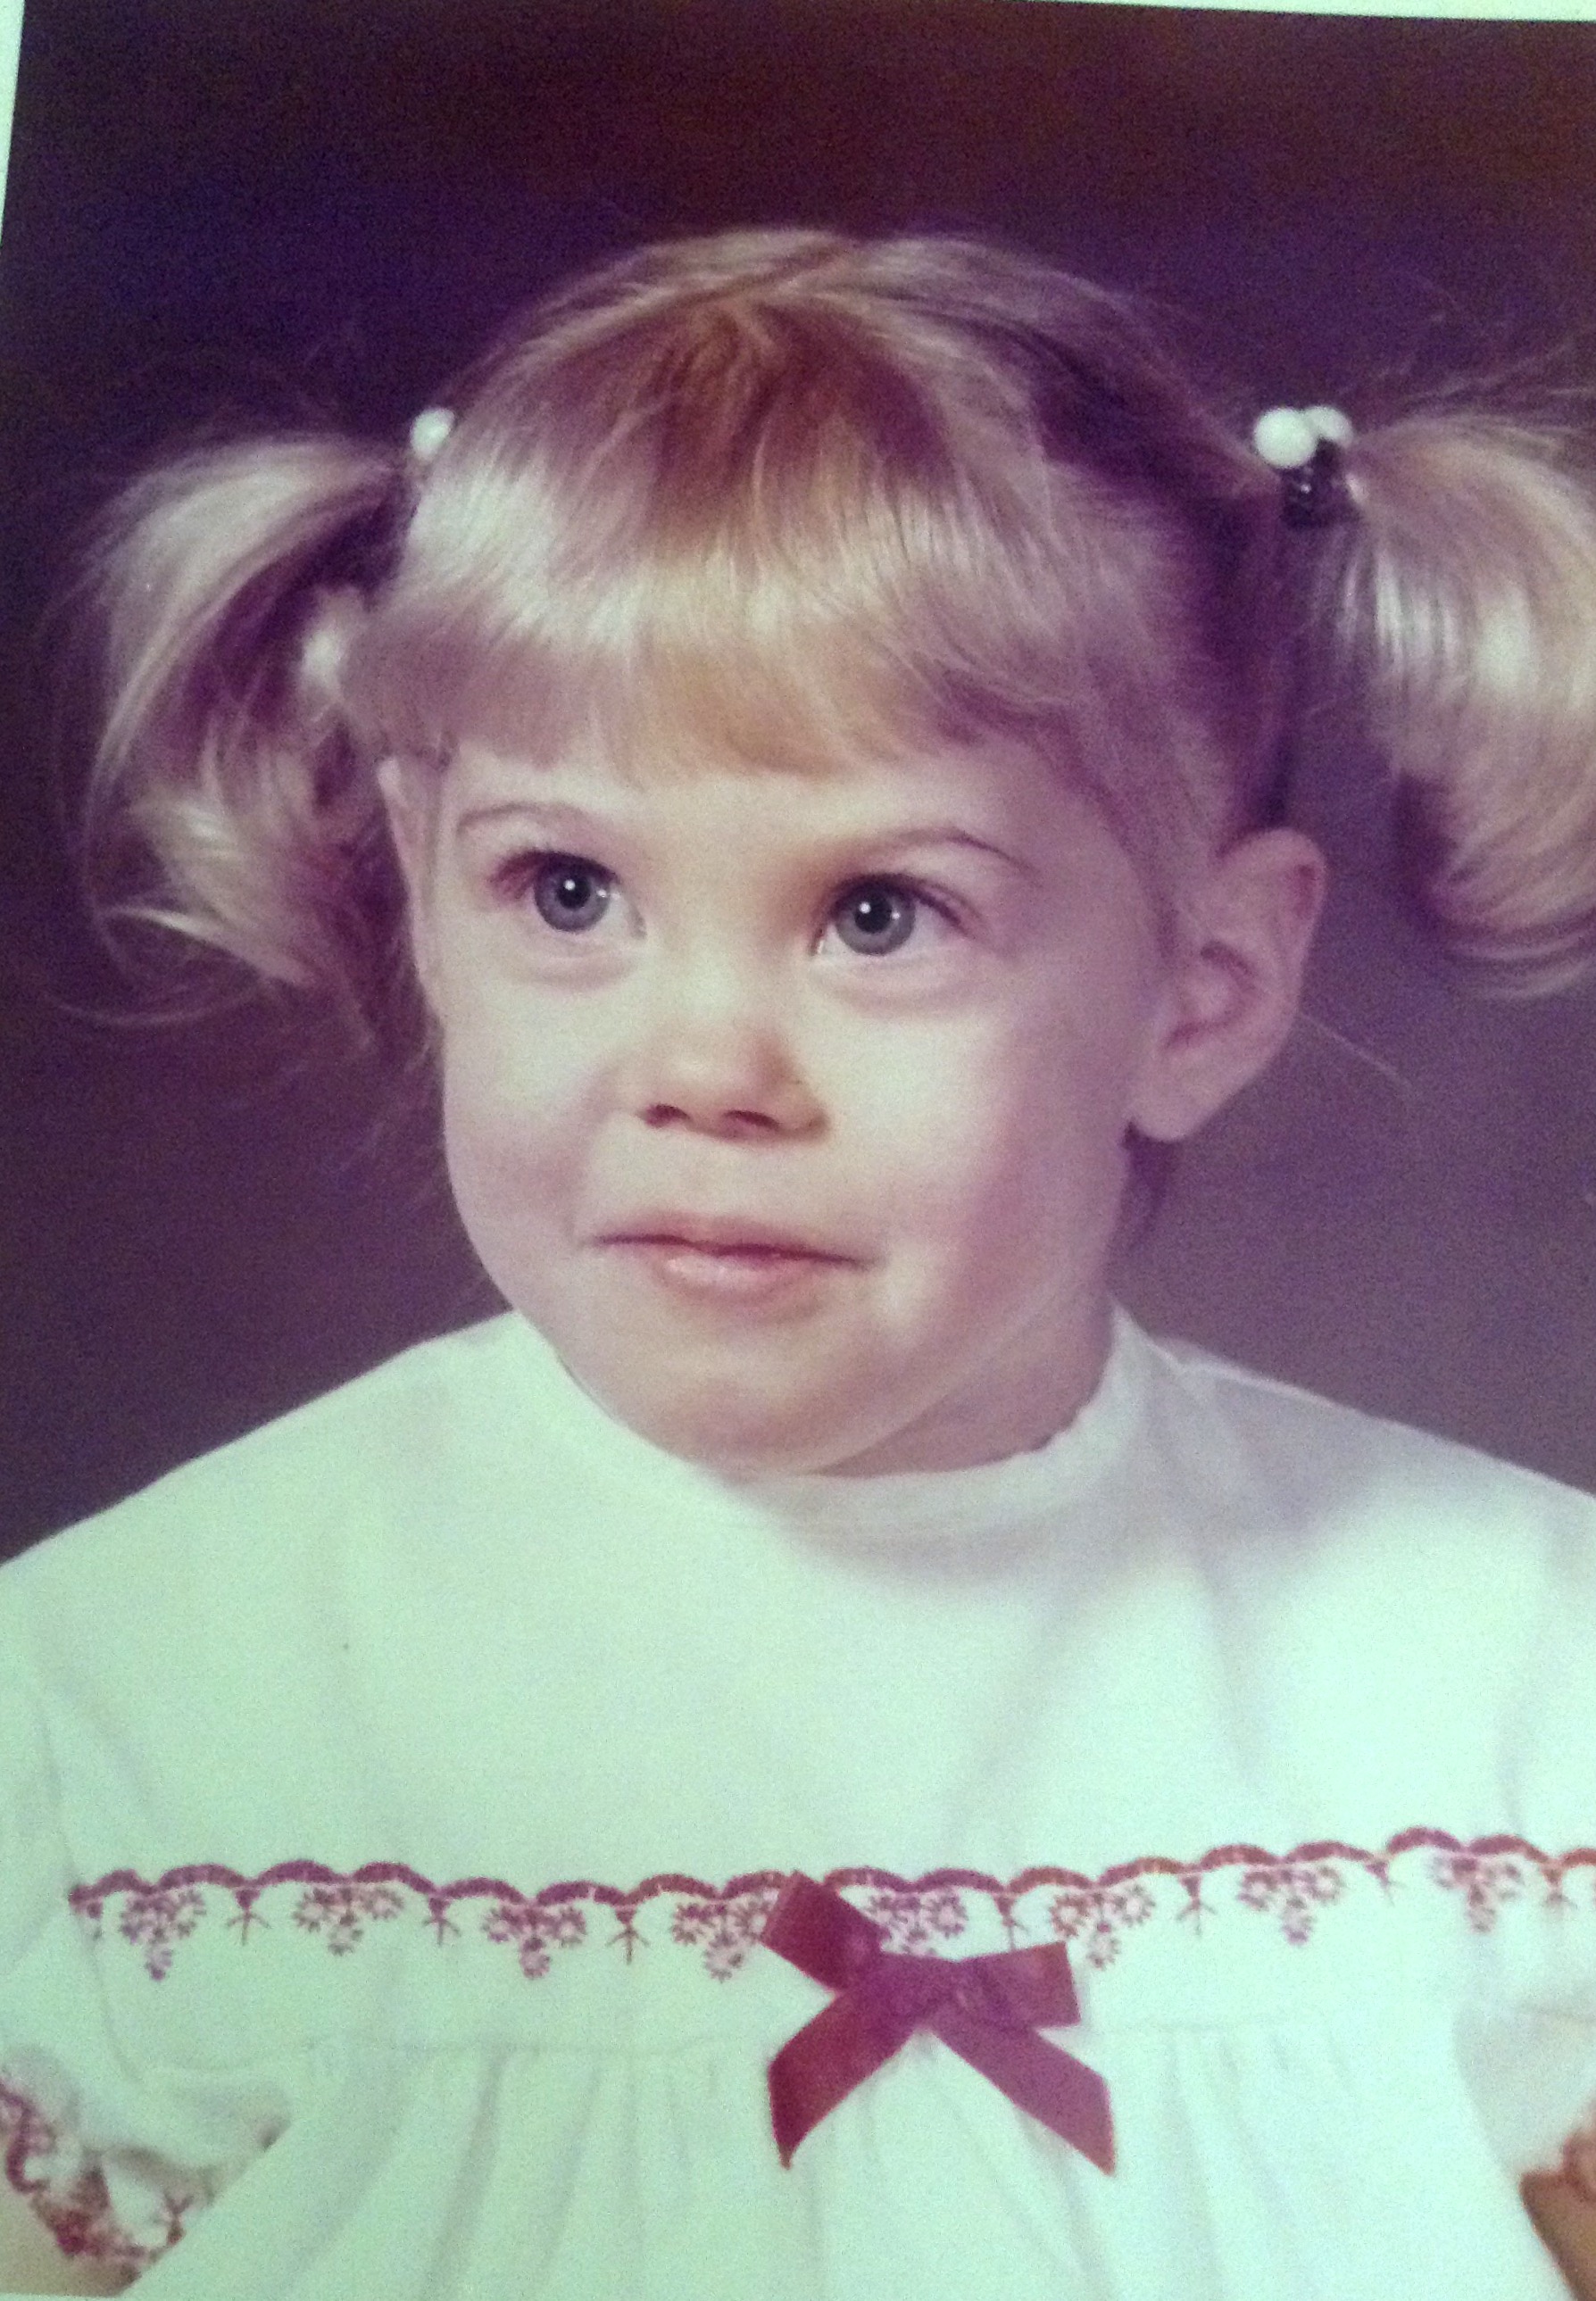 One of my favorite pictures of Lisa at age 2.